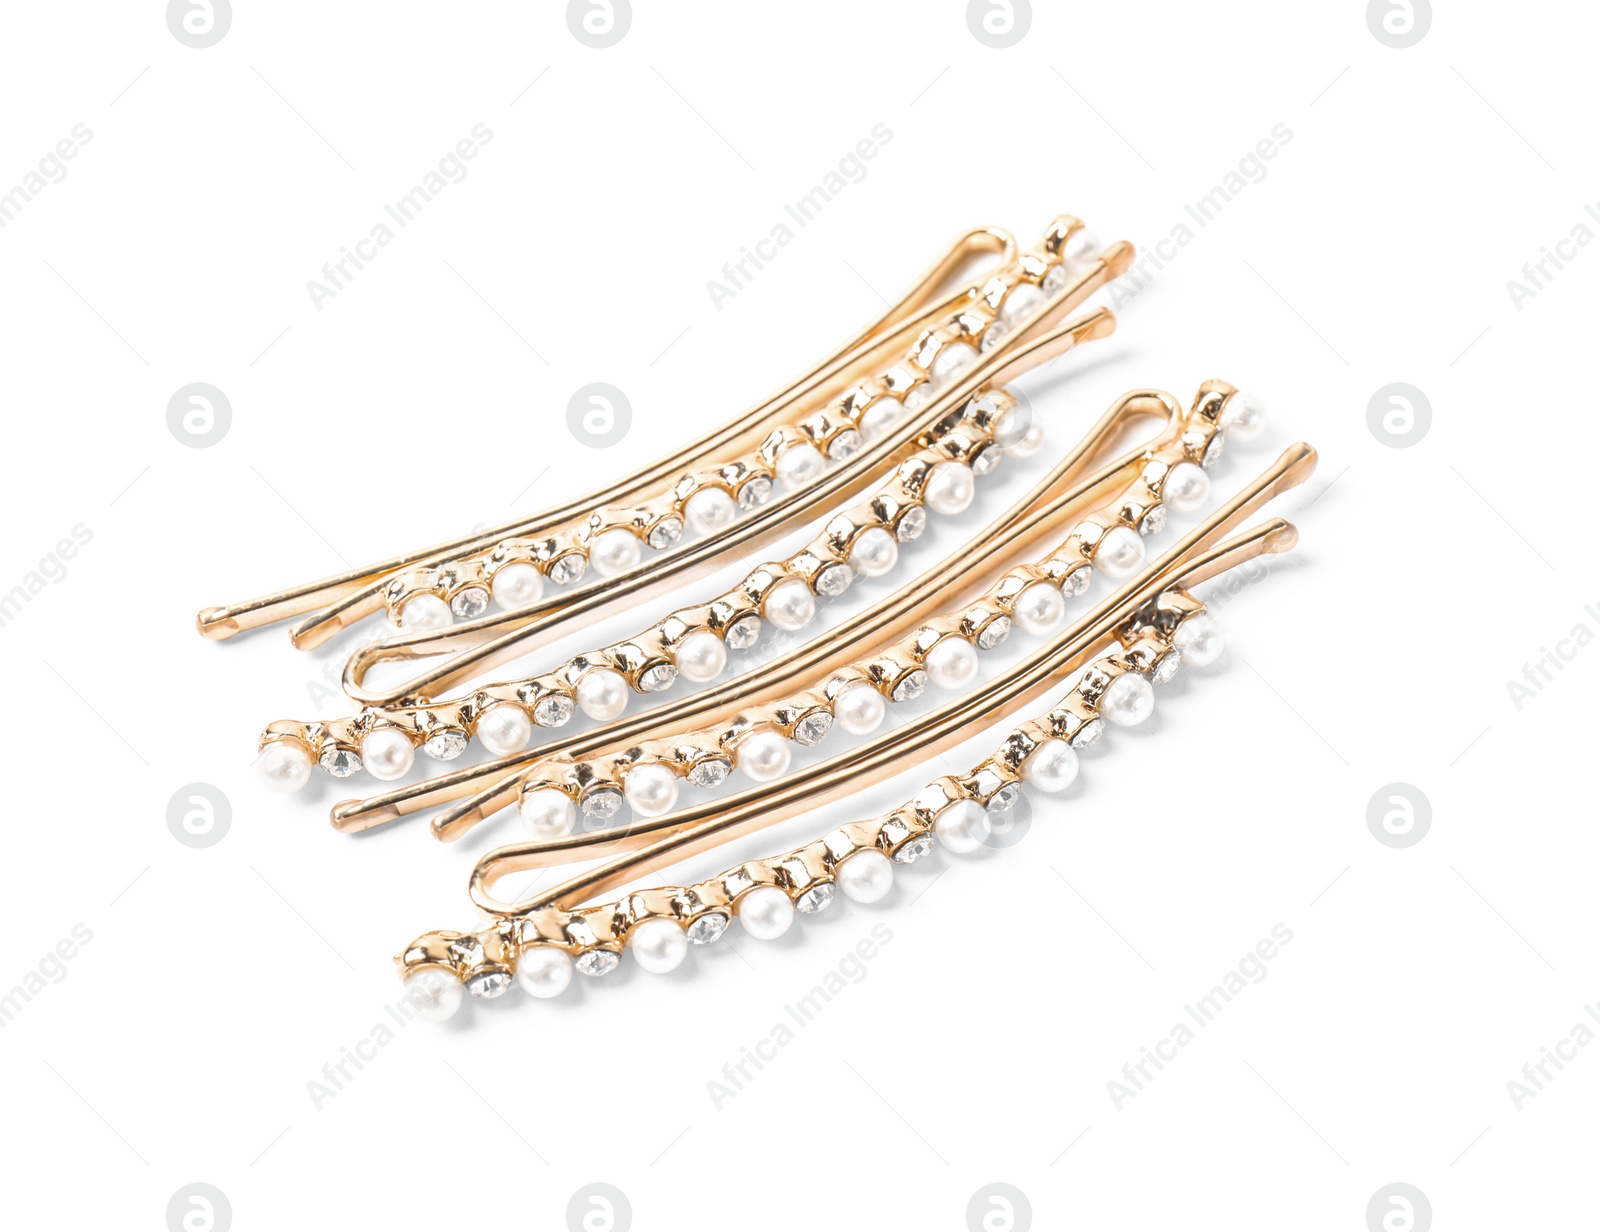 Photo of Many beautiful gold hair pins with gems on white background